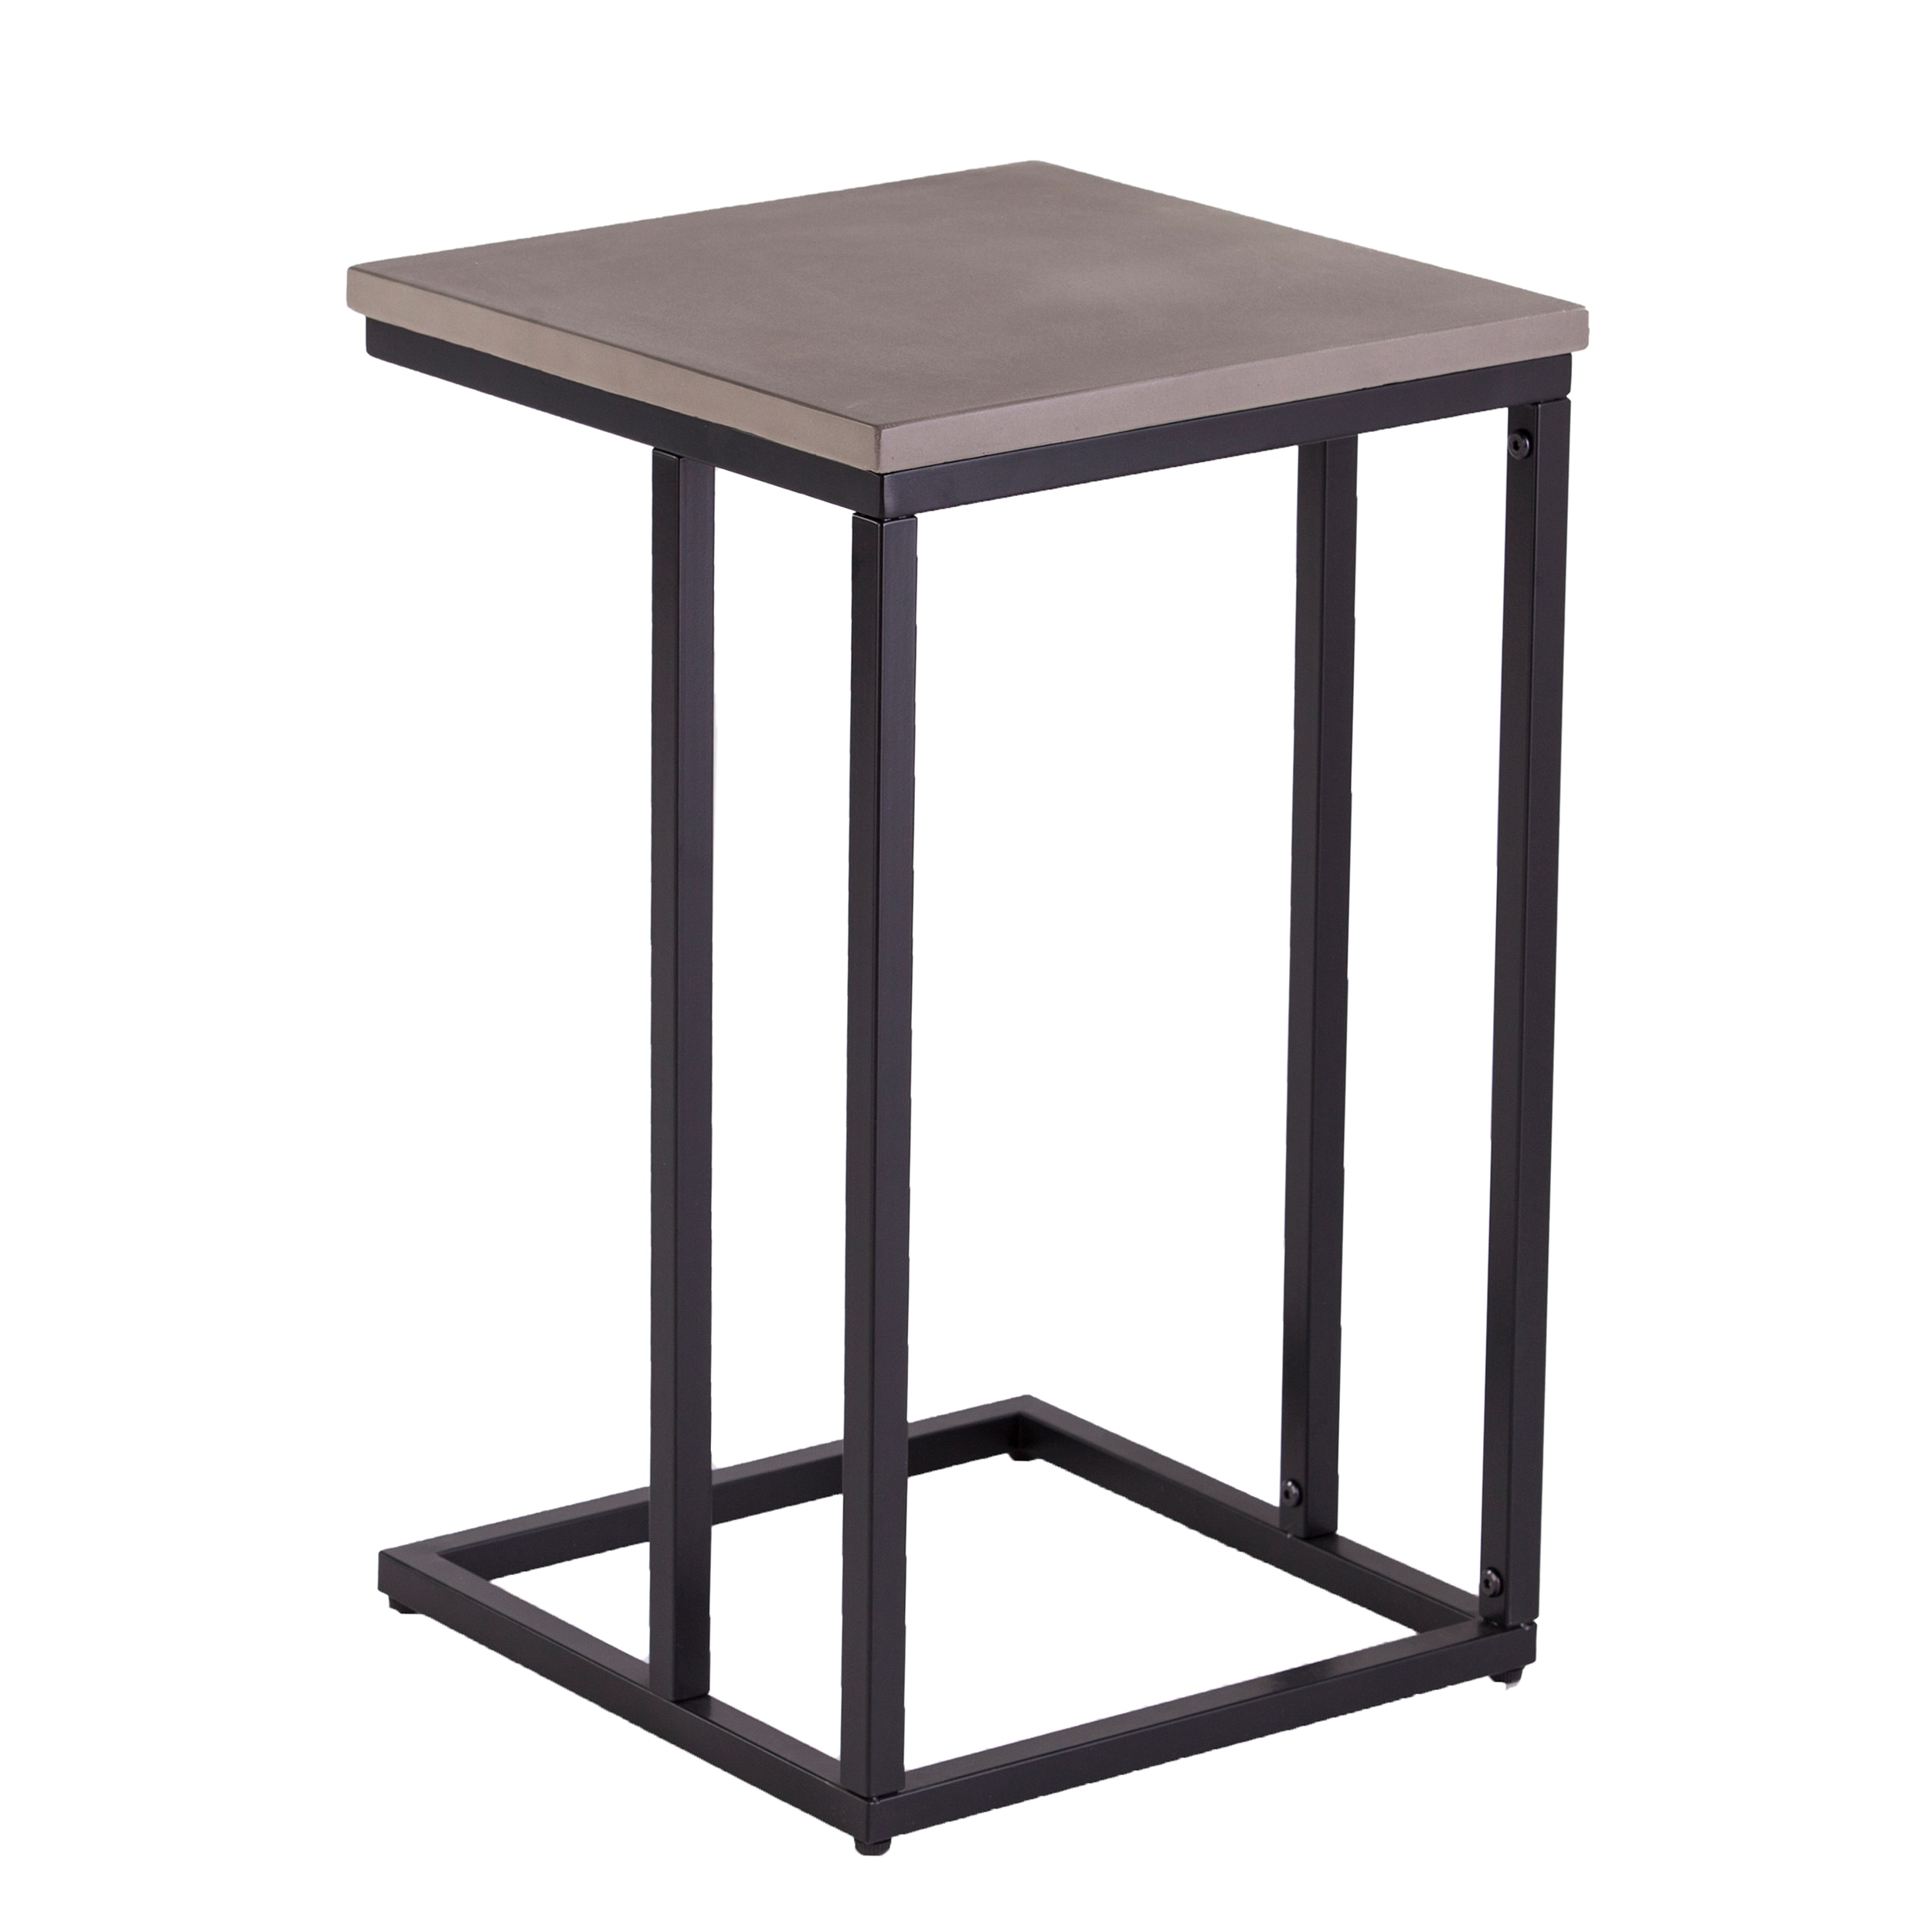 Stadium breken Verloren hart Boston Loft Furnishings Sorlen Square Outdoor End Table 15-in W x 15-in L  in the Patio Tables department at Lowes.com